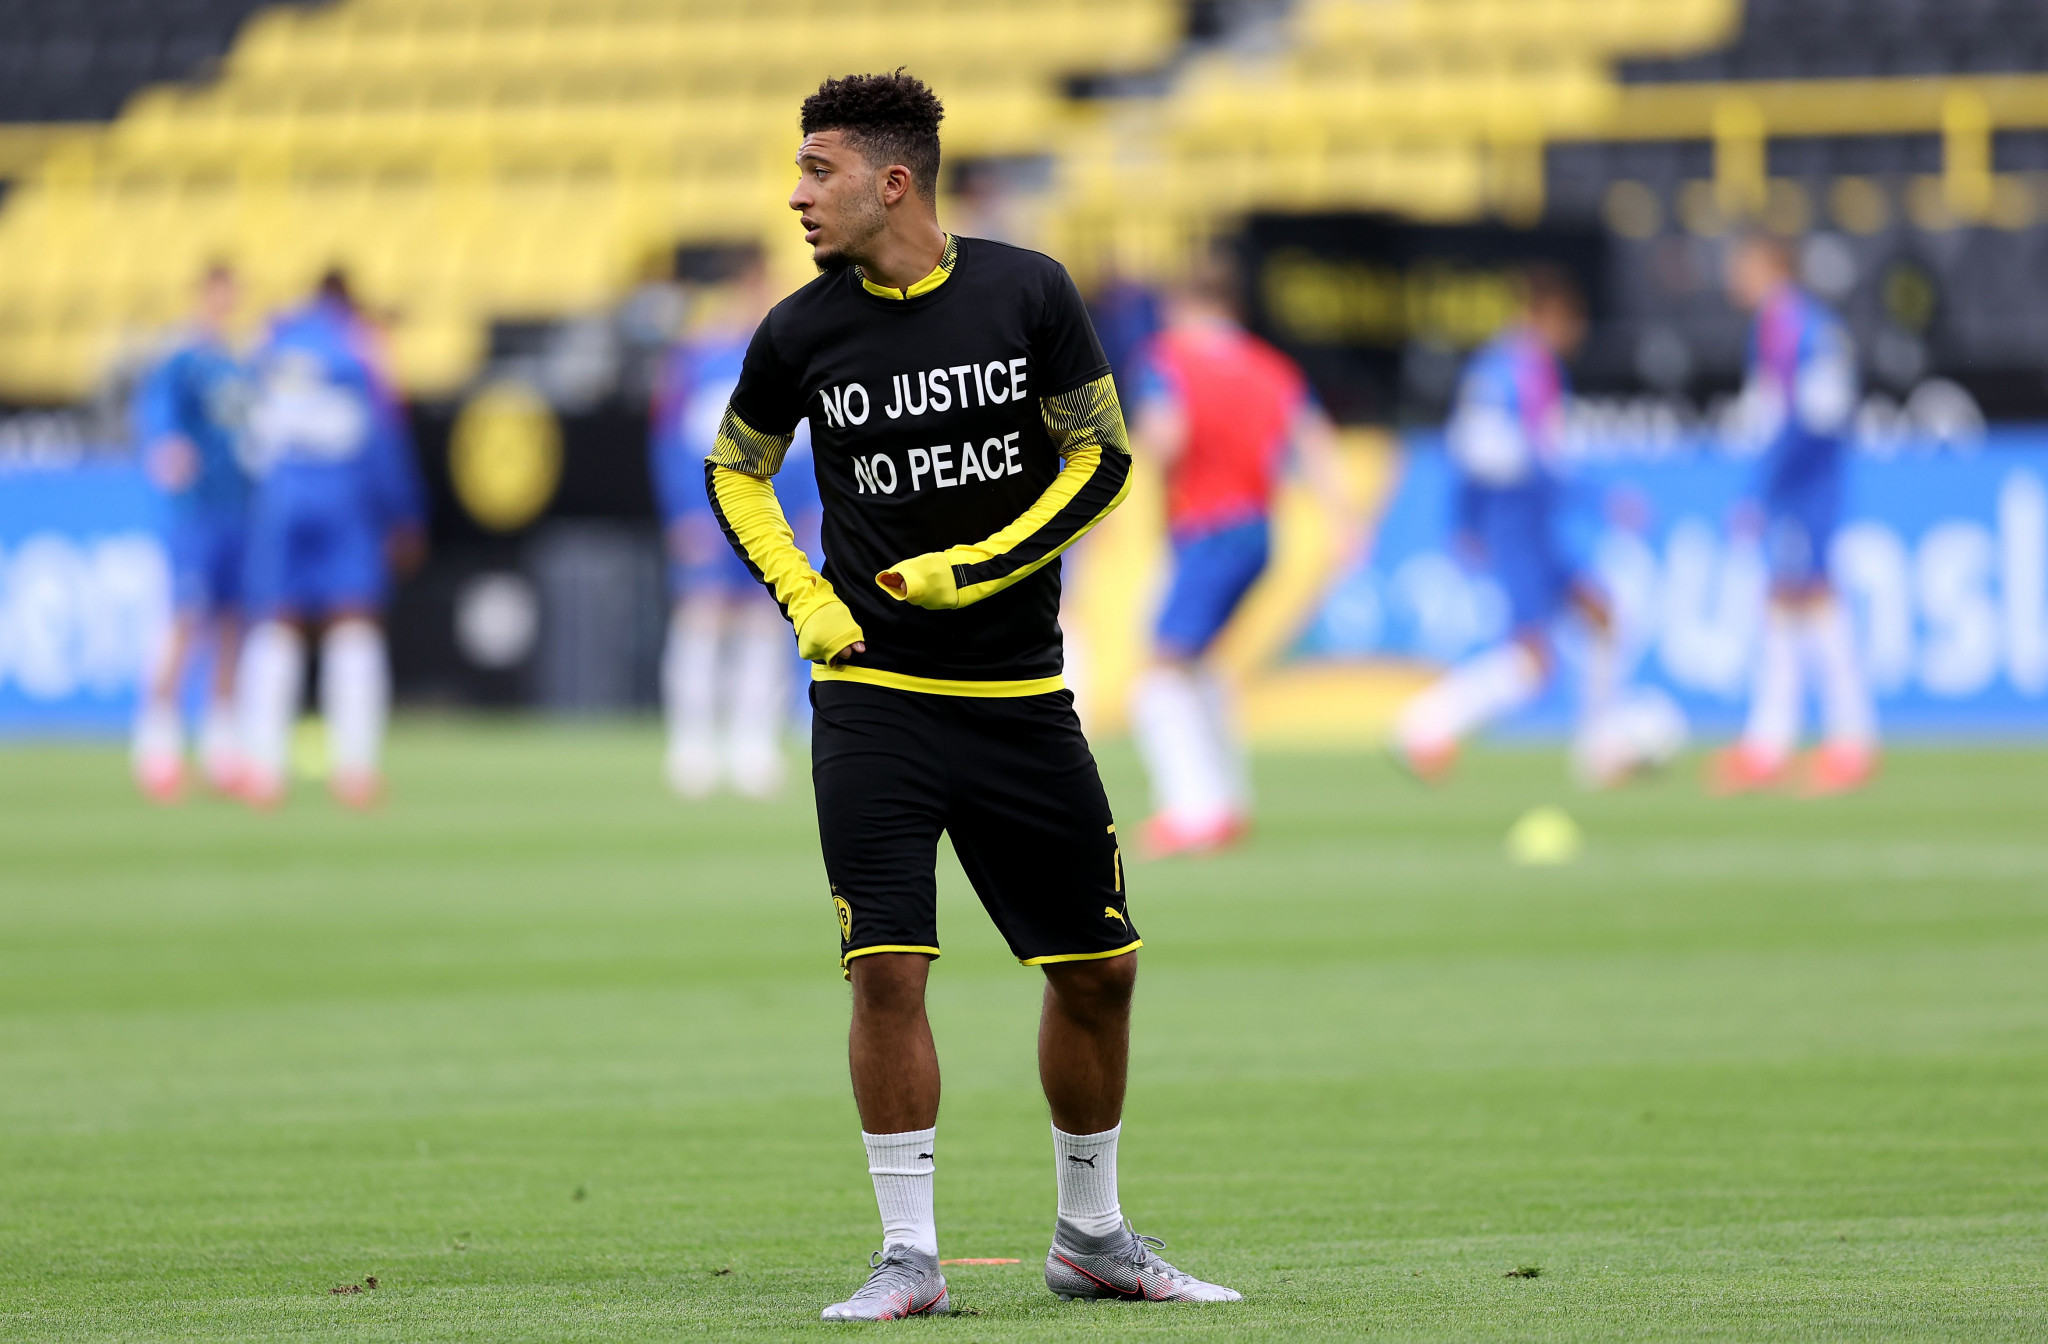 Jadon Sancho again expressed his right to protest yesterday ©Getty Images